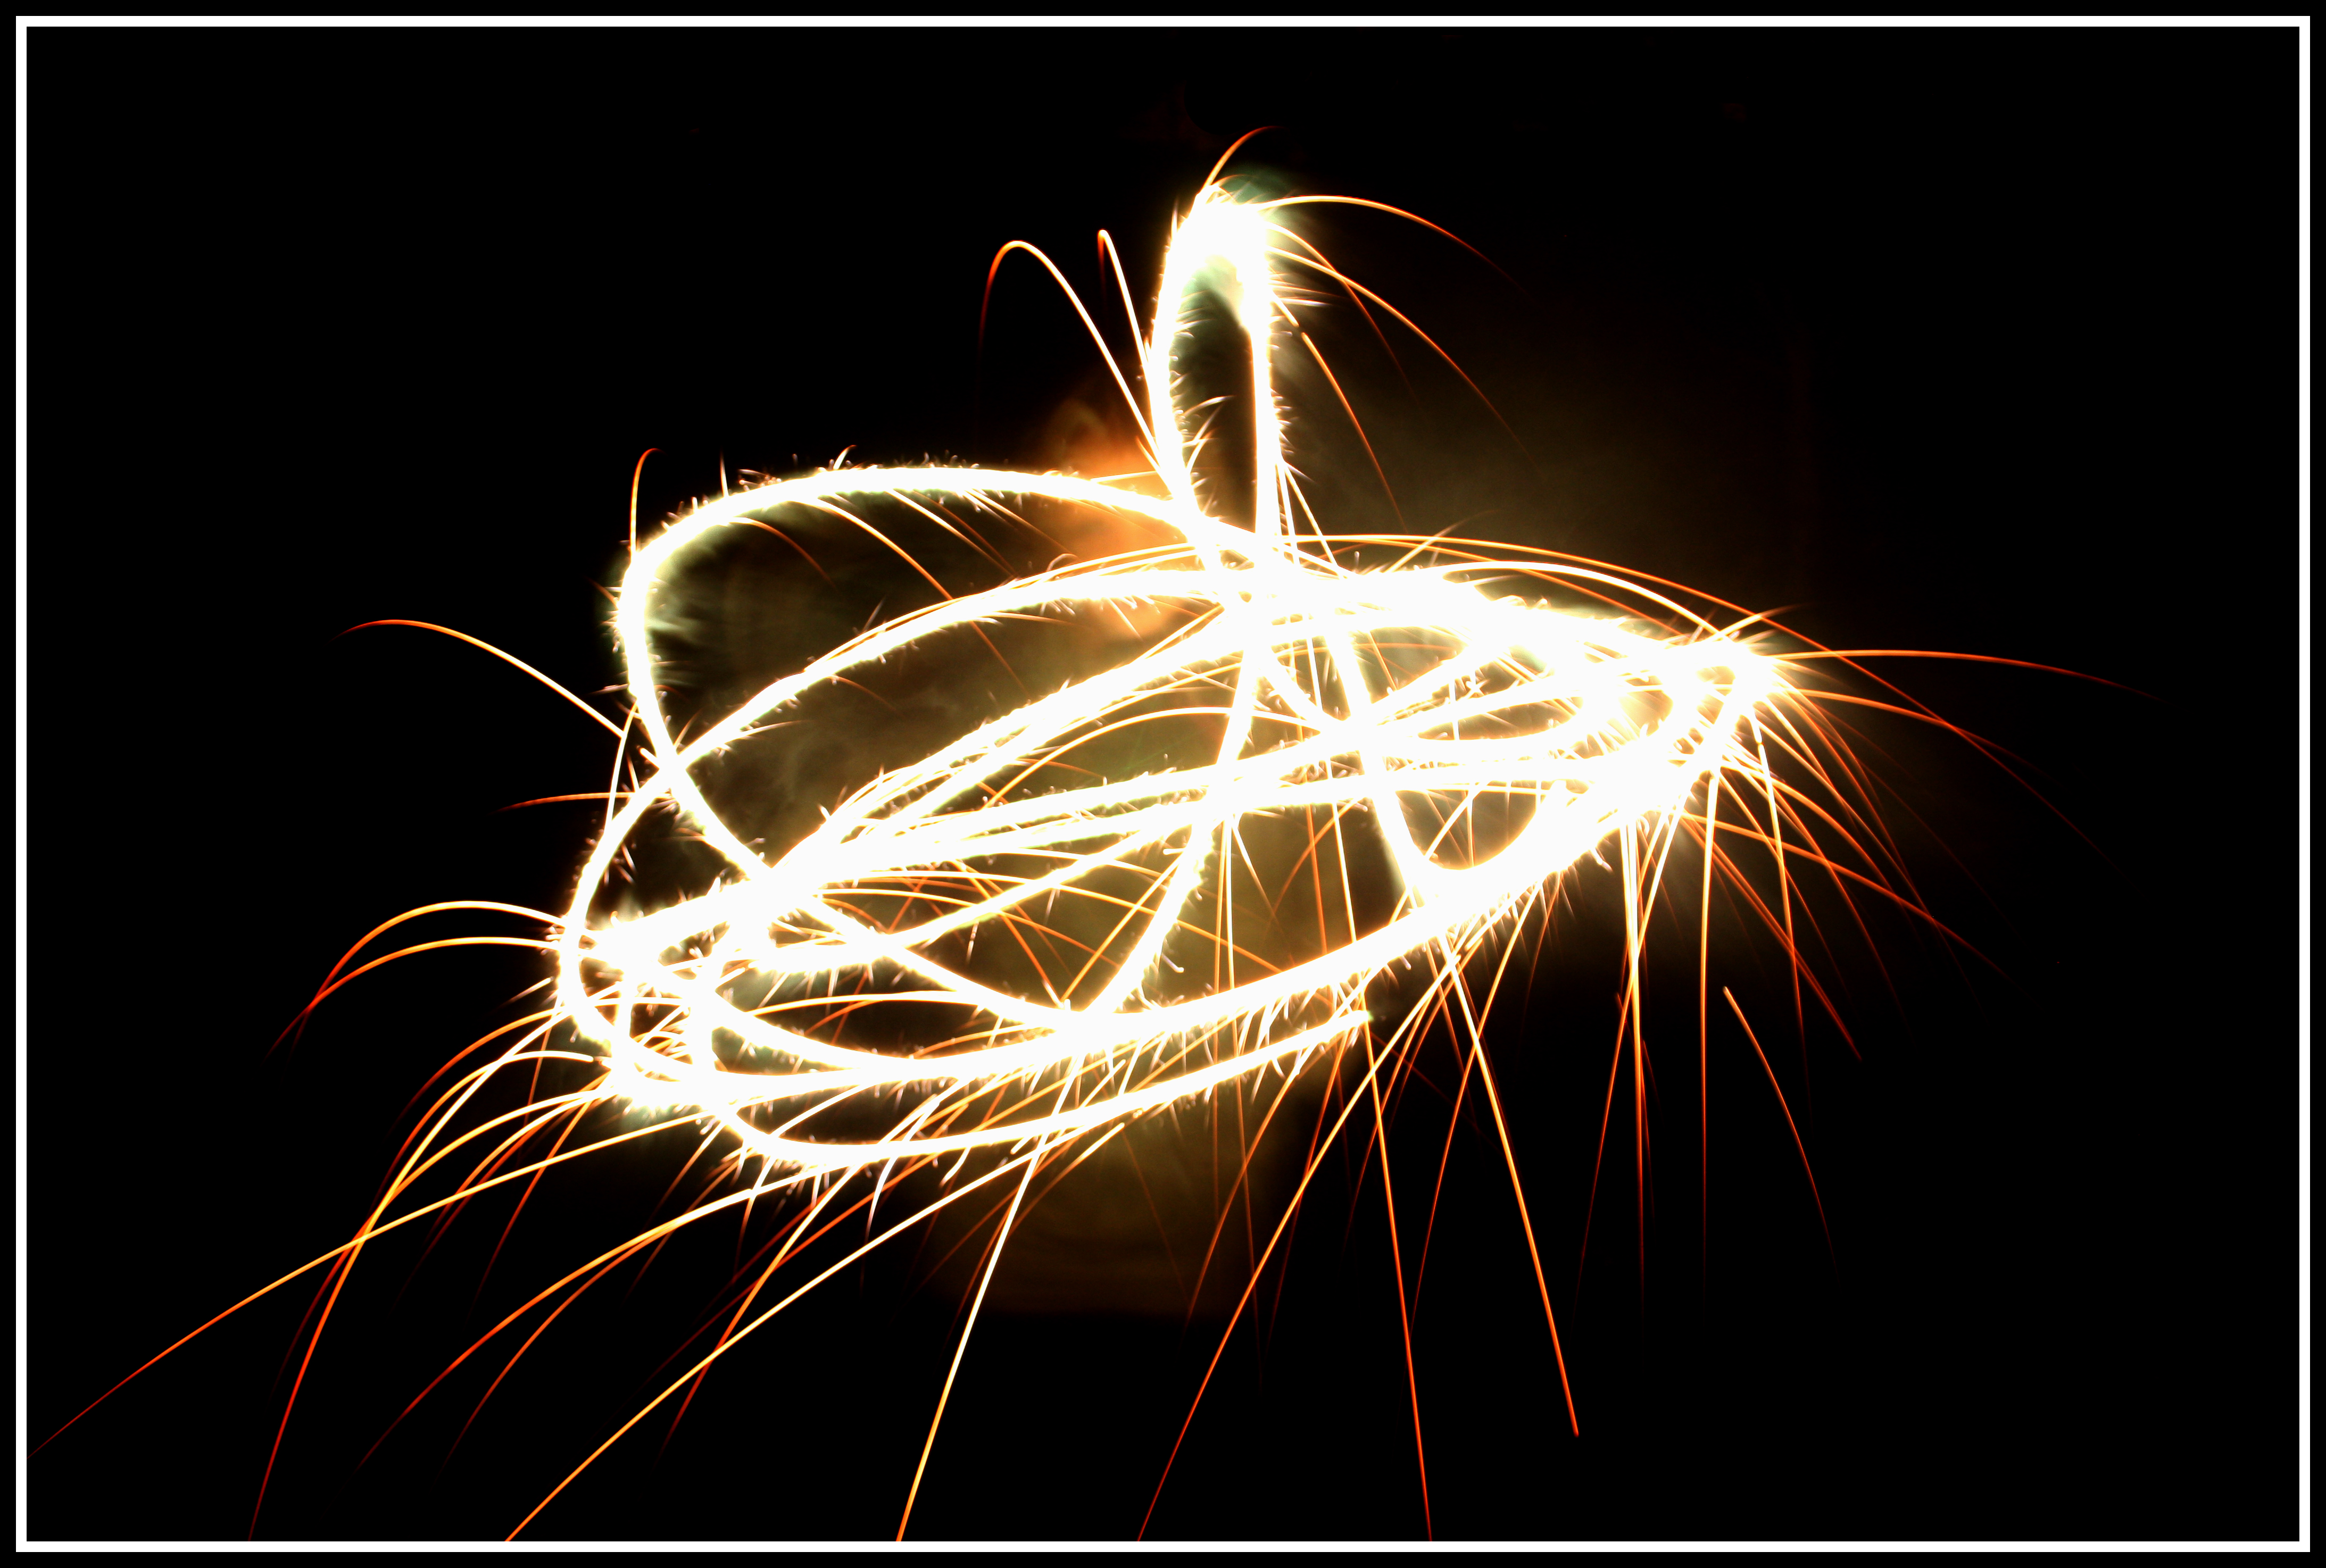 Livingloud - The Bowmanblog: Fun with Sparklers